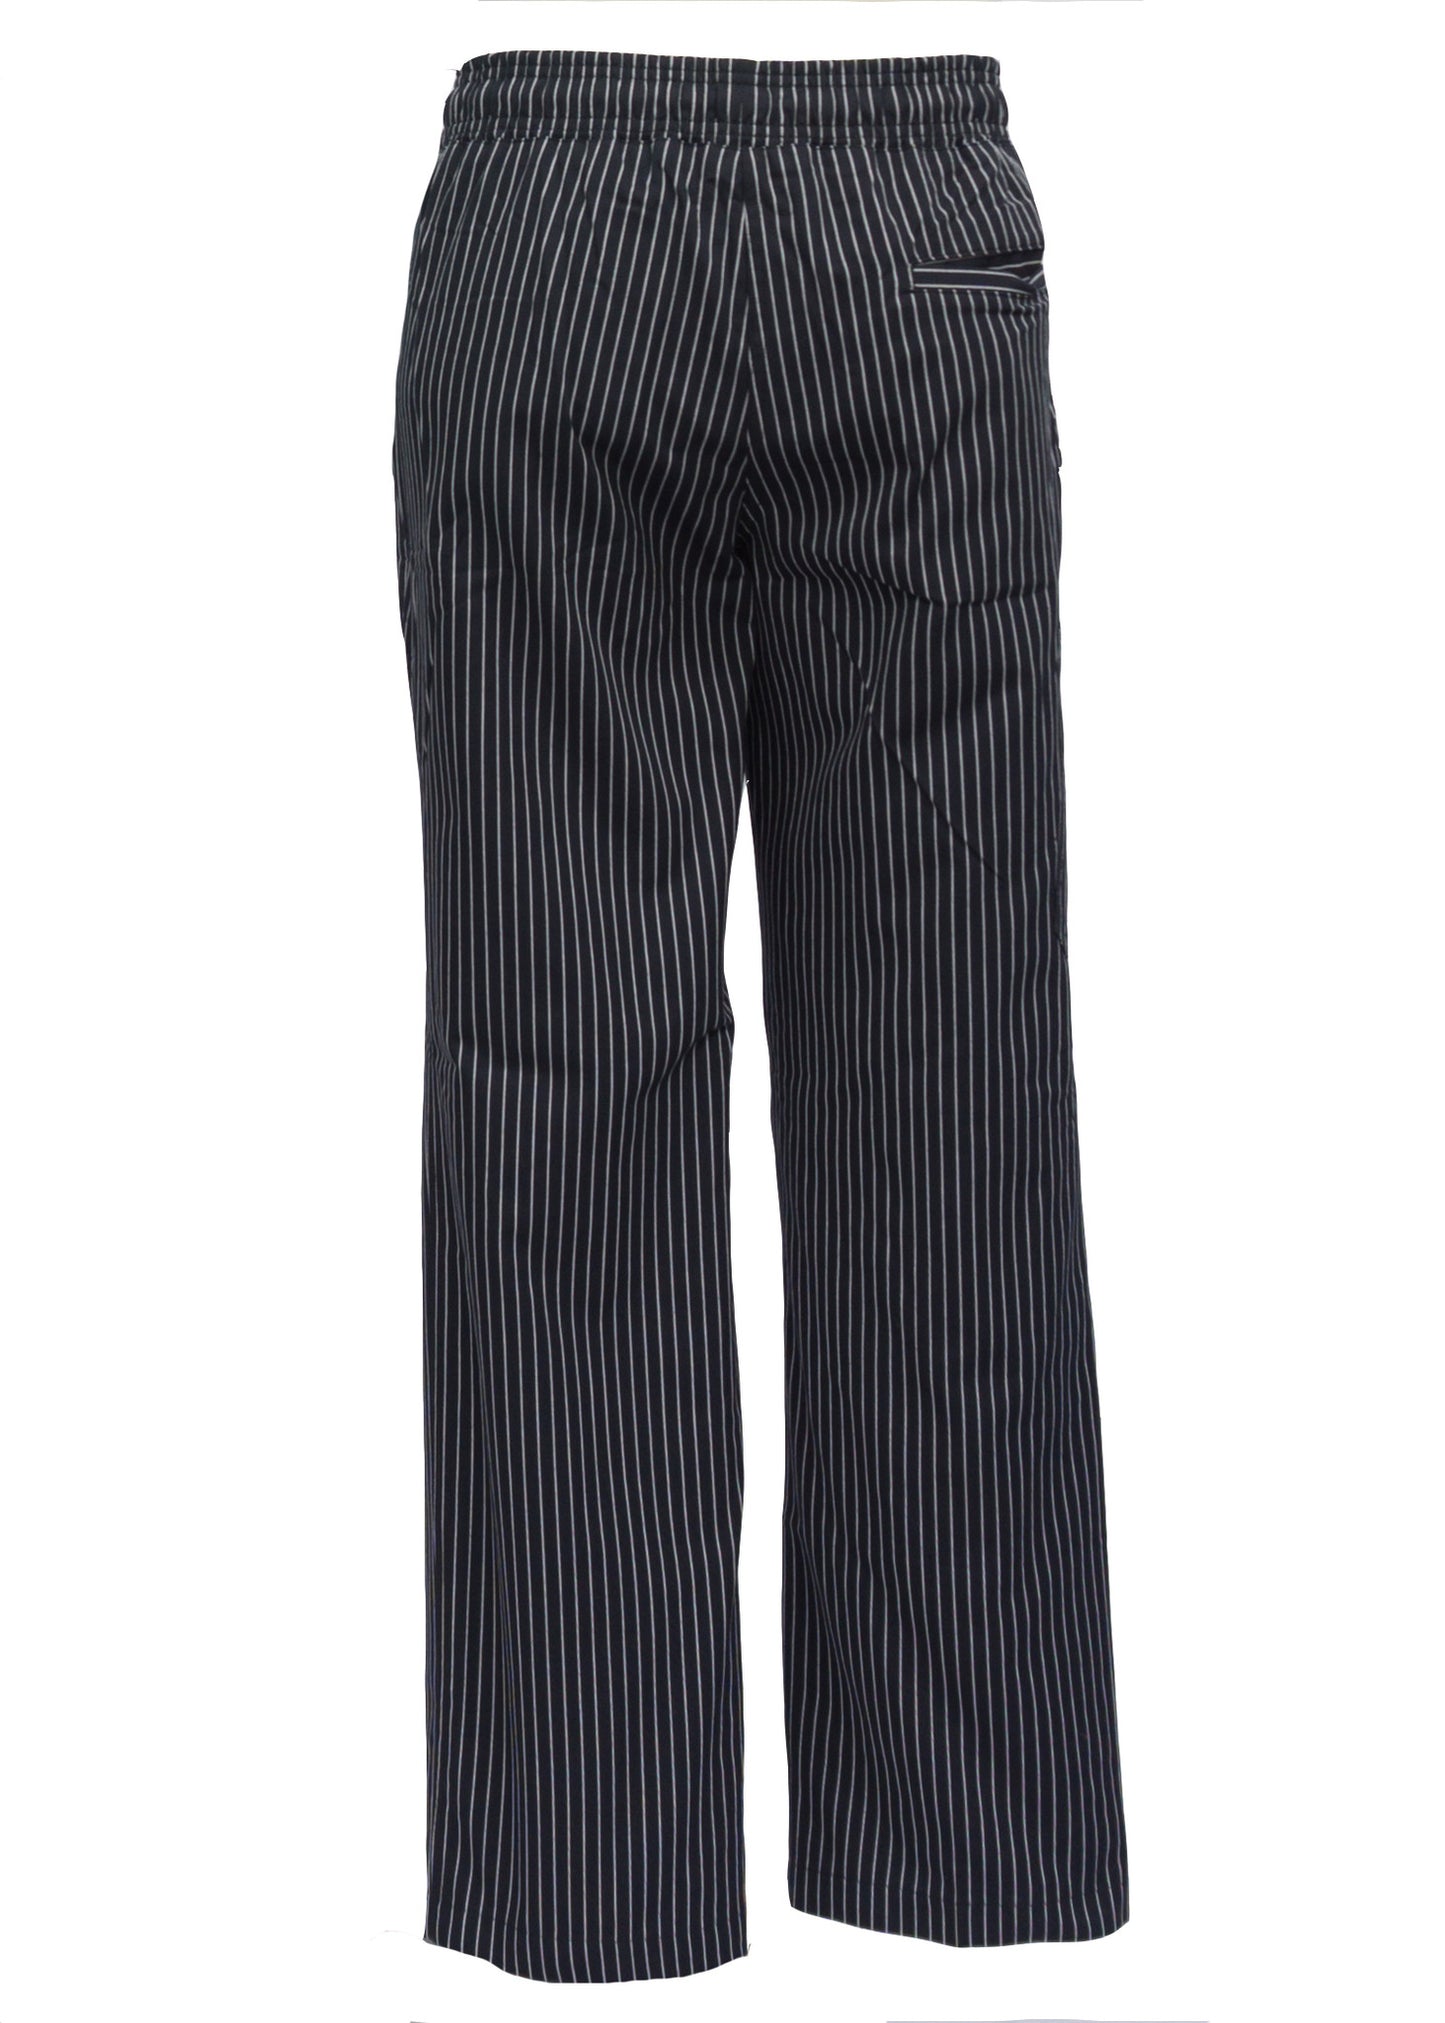 Small Stripes Chef Pants - Green Chef Wear